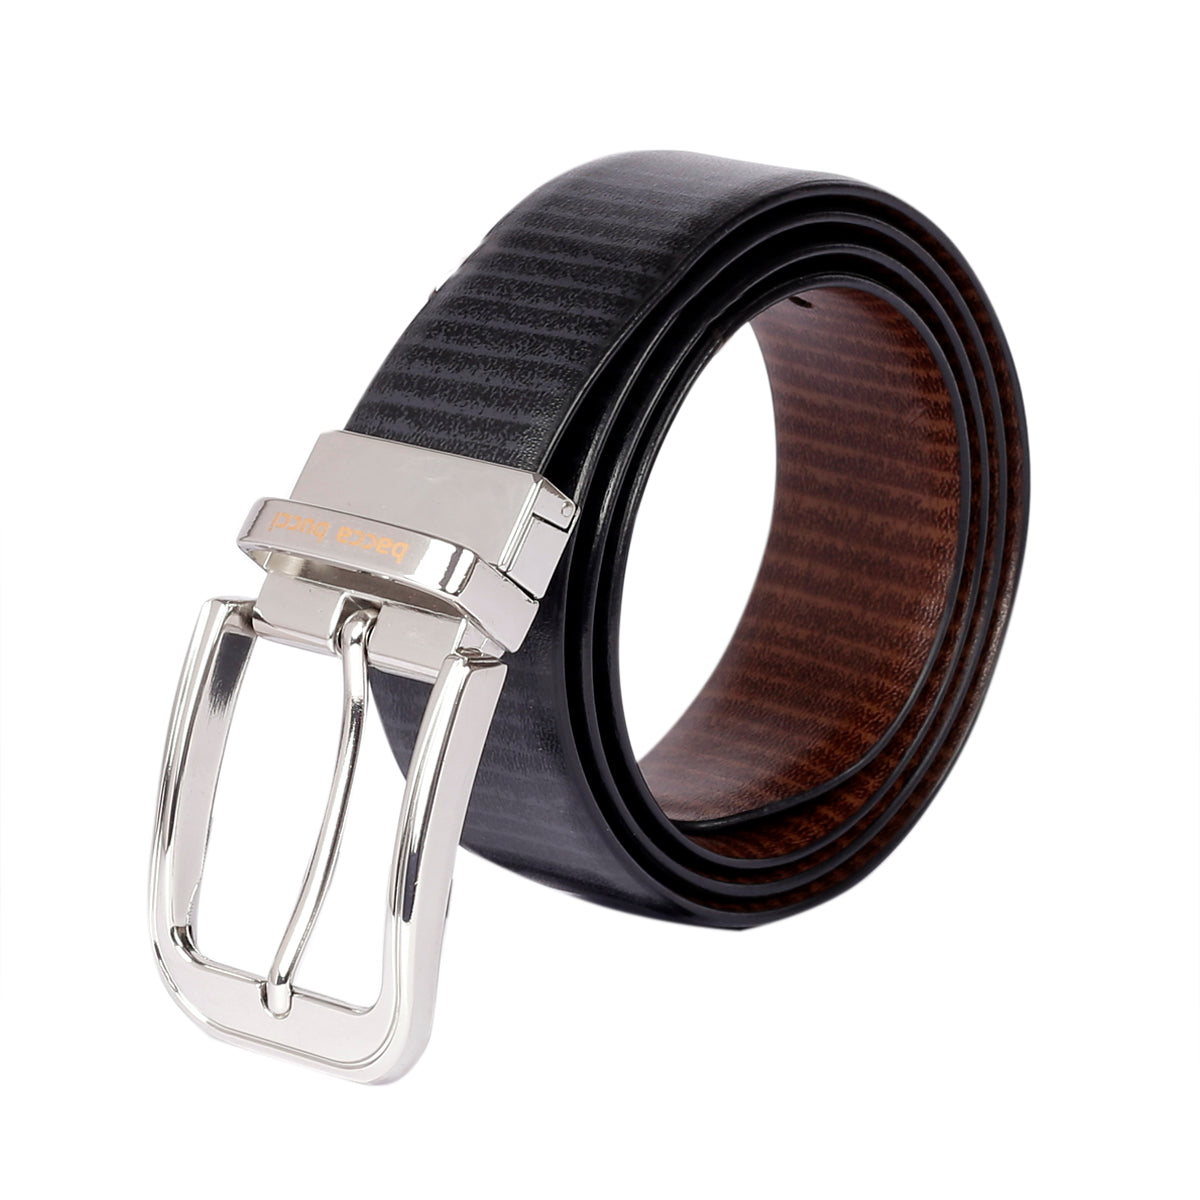 Bacca Bucci Reversible Classic Dress belt with Italian smooth Genuine leather Black & Brown - Bacca Bucci